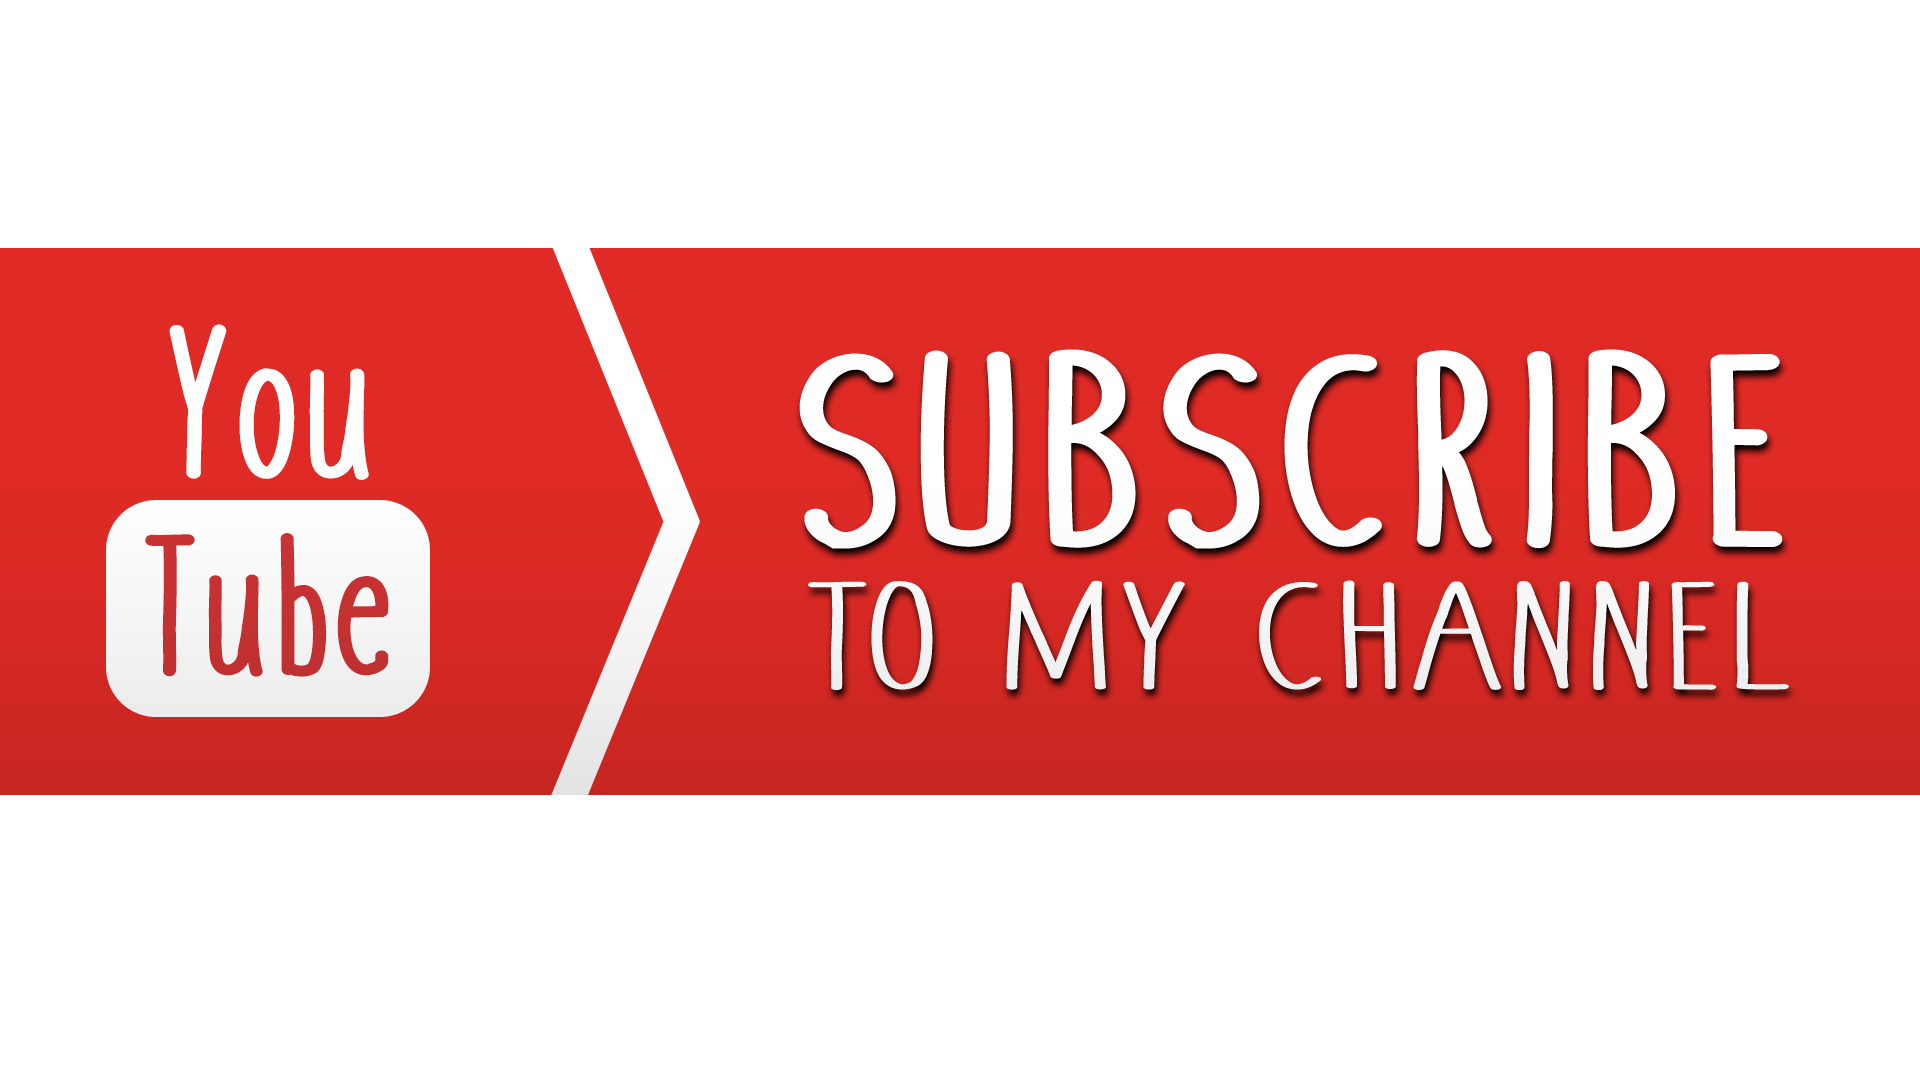 Youtube Logo Subscribe To My Channel Red Button Png Transparent Background Free Download Freeiconspng